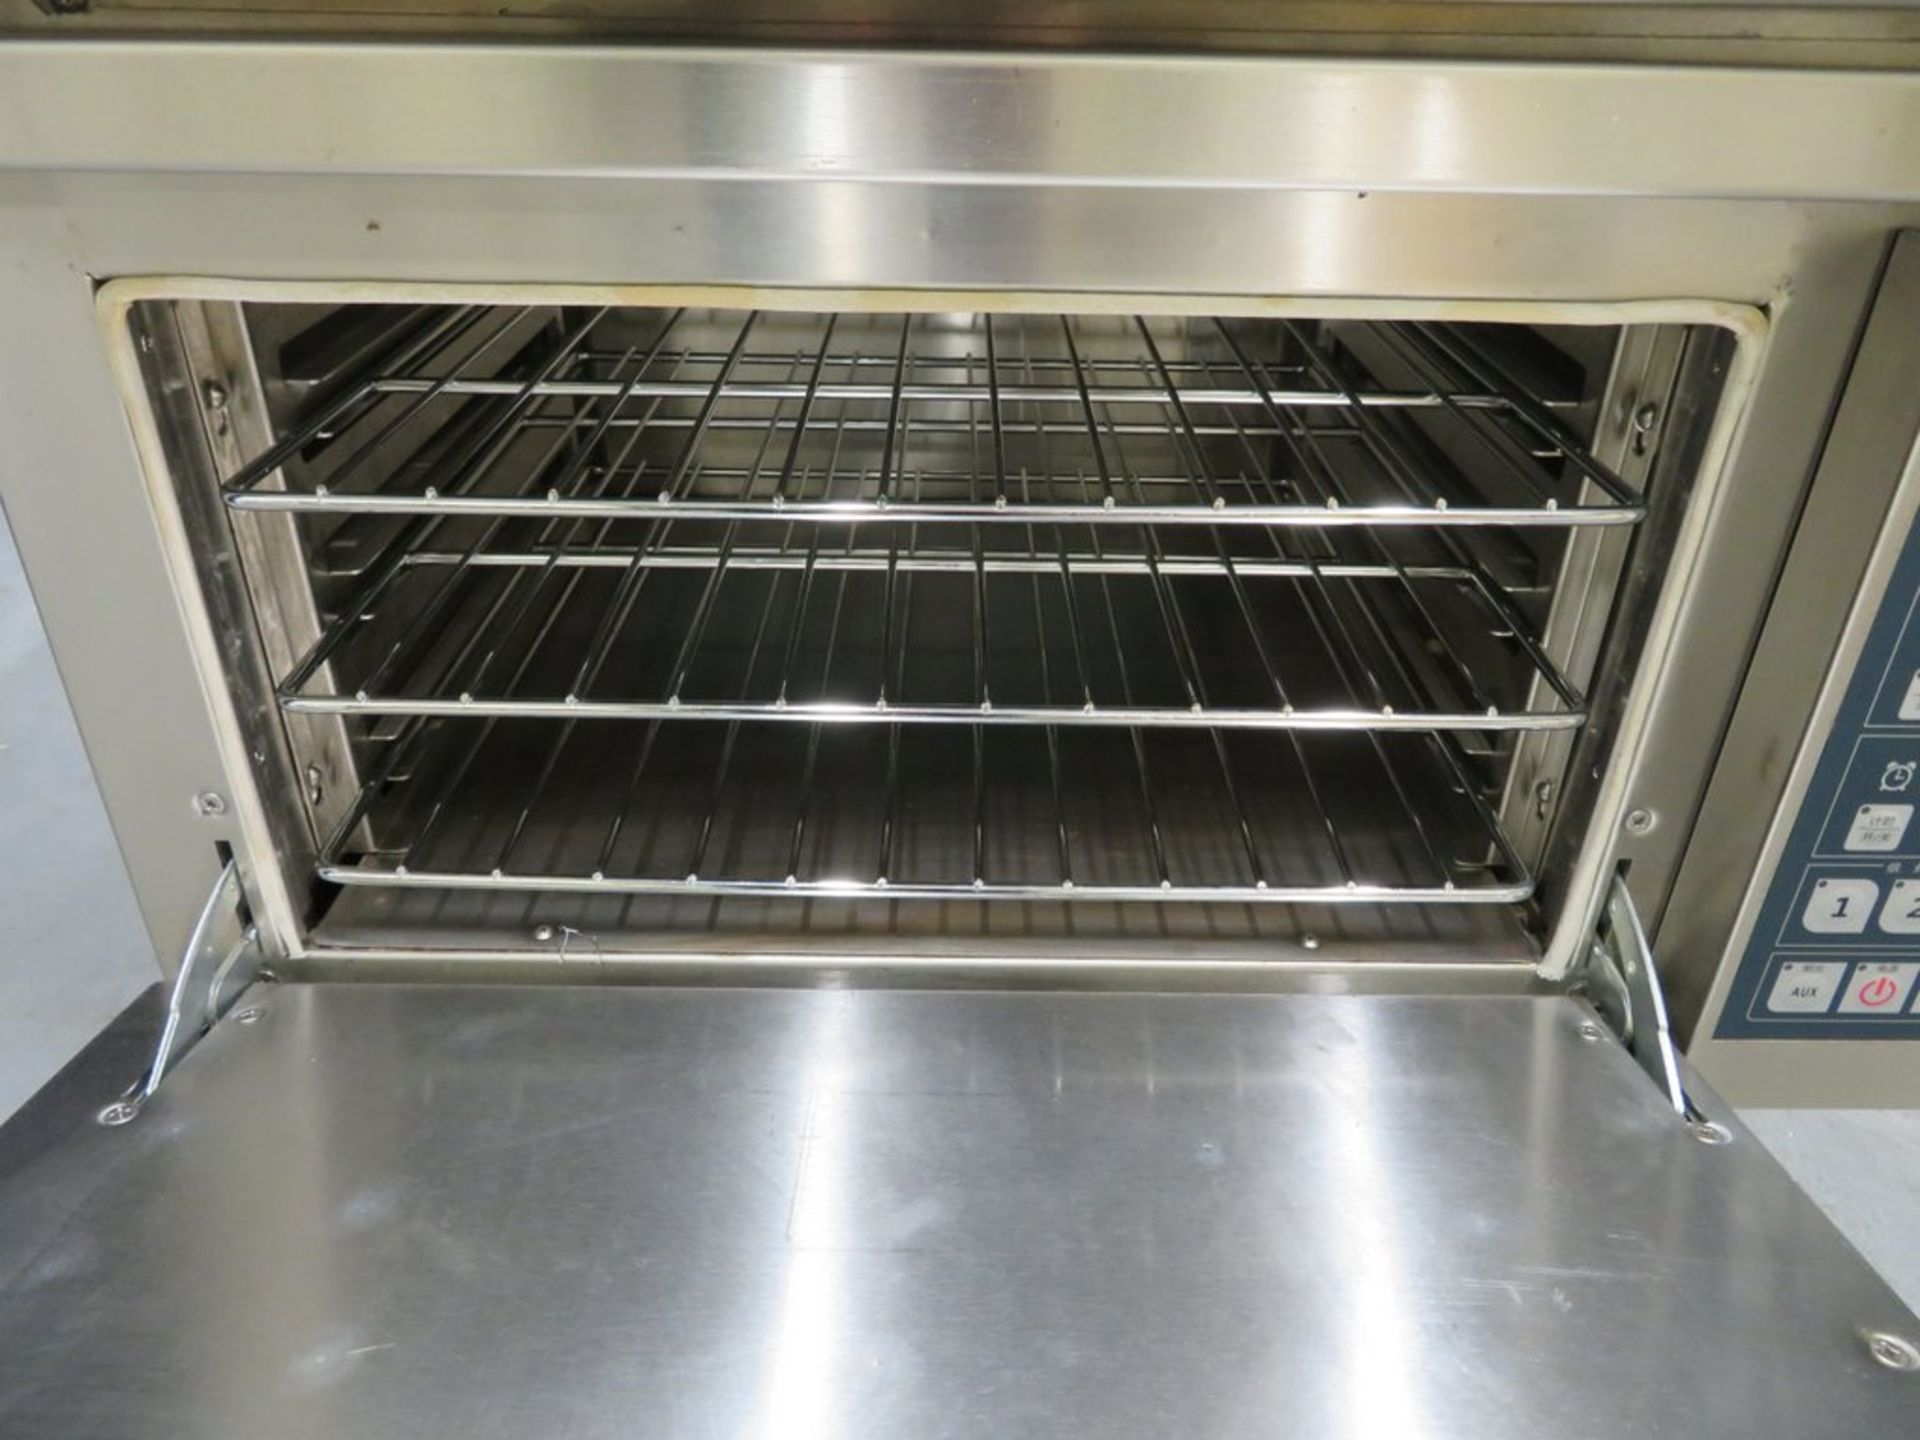 4 zone heavy duty induction hob with oven, model RWEC-8B-19, 3 phase, ex display - Image 7 of 10